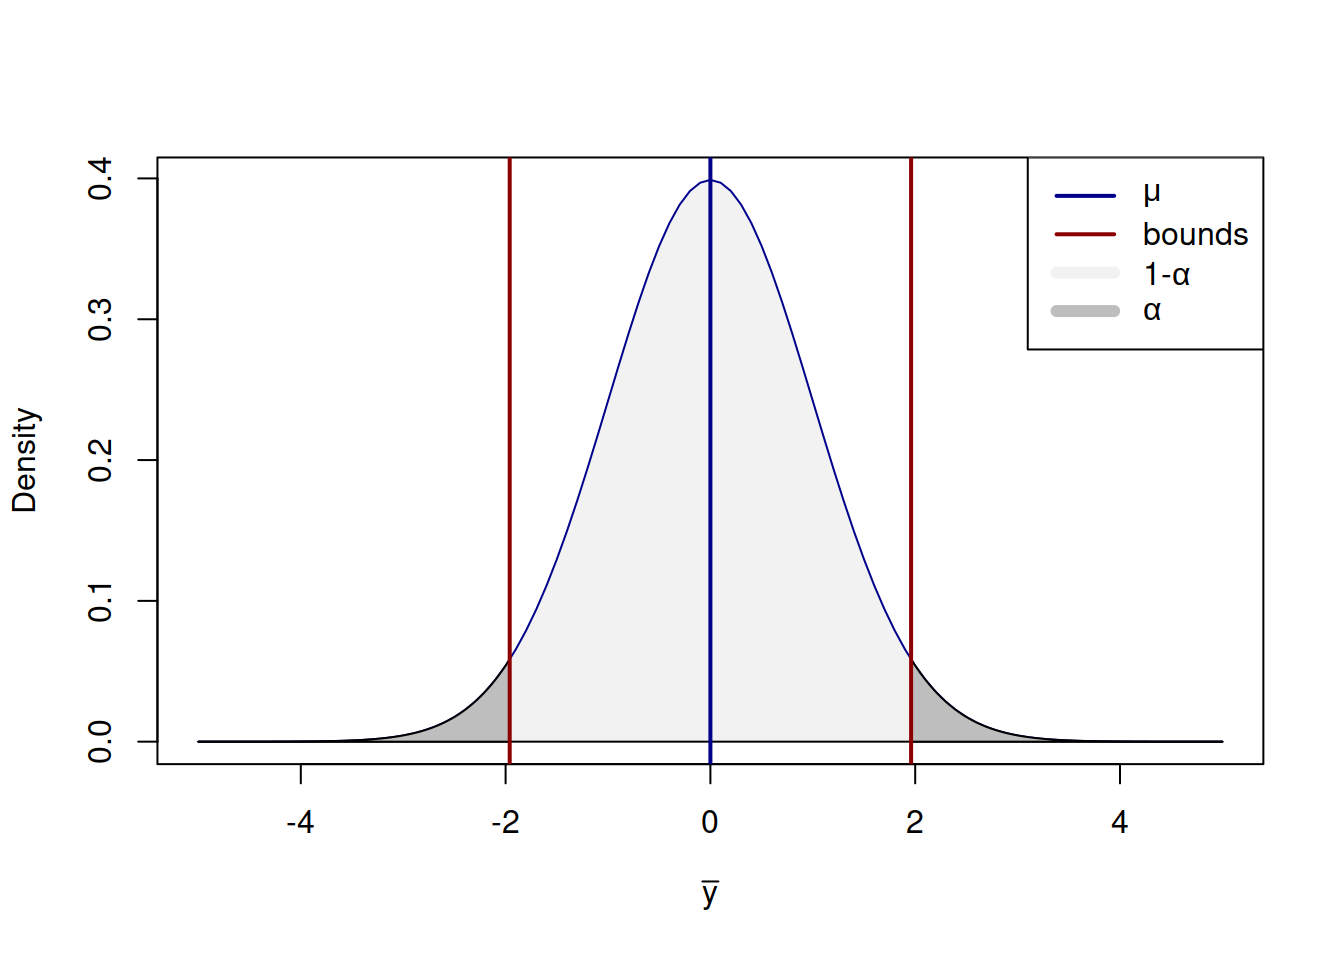 Distribution of the sample mean and the confidence interval based on the population data.